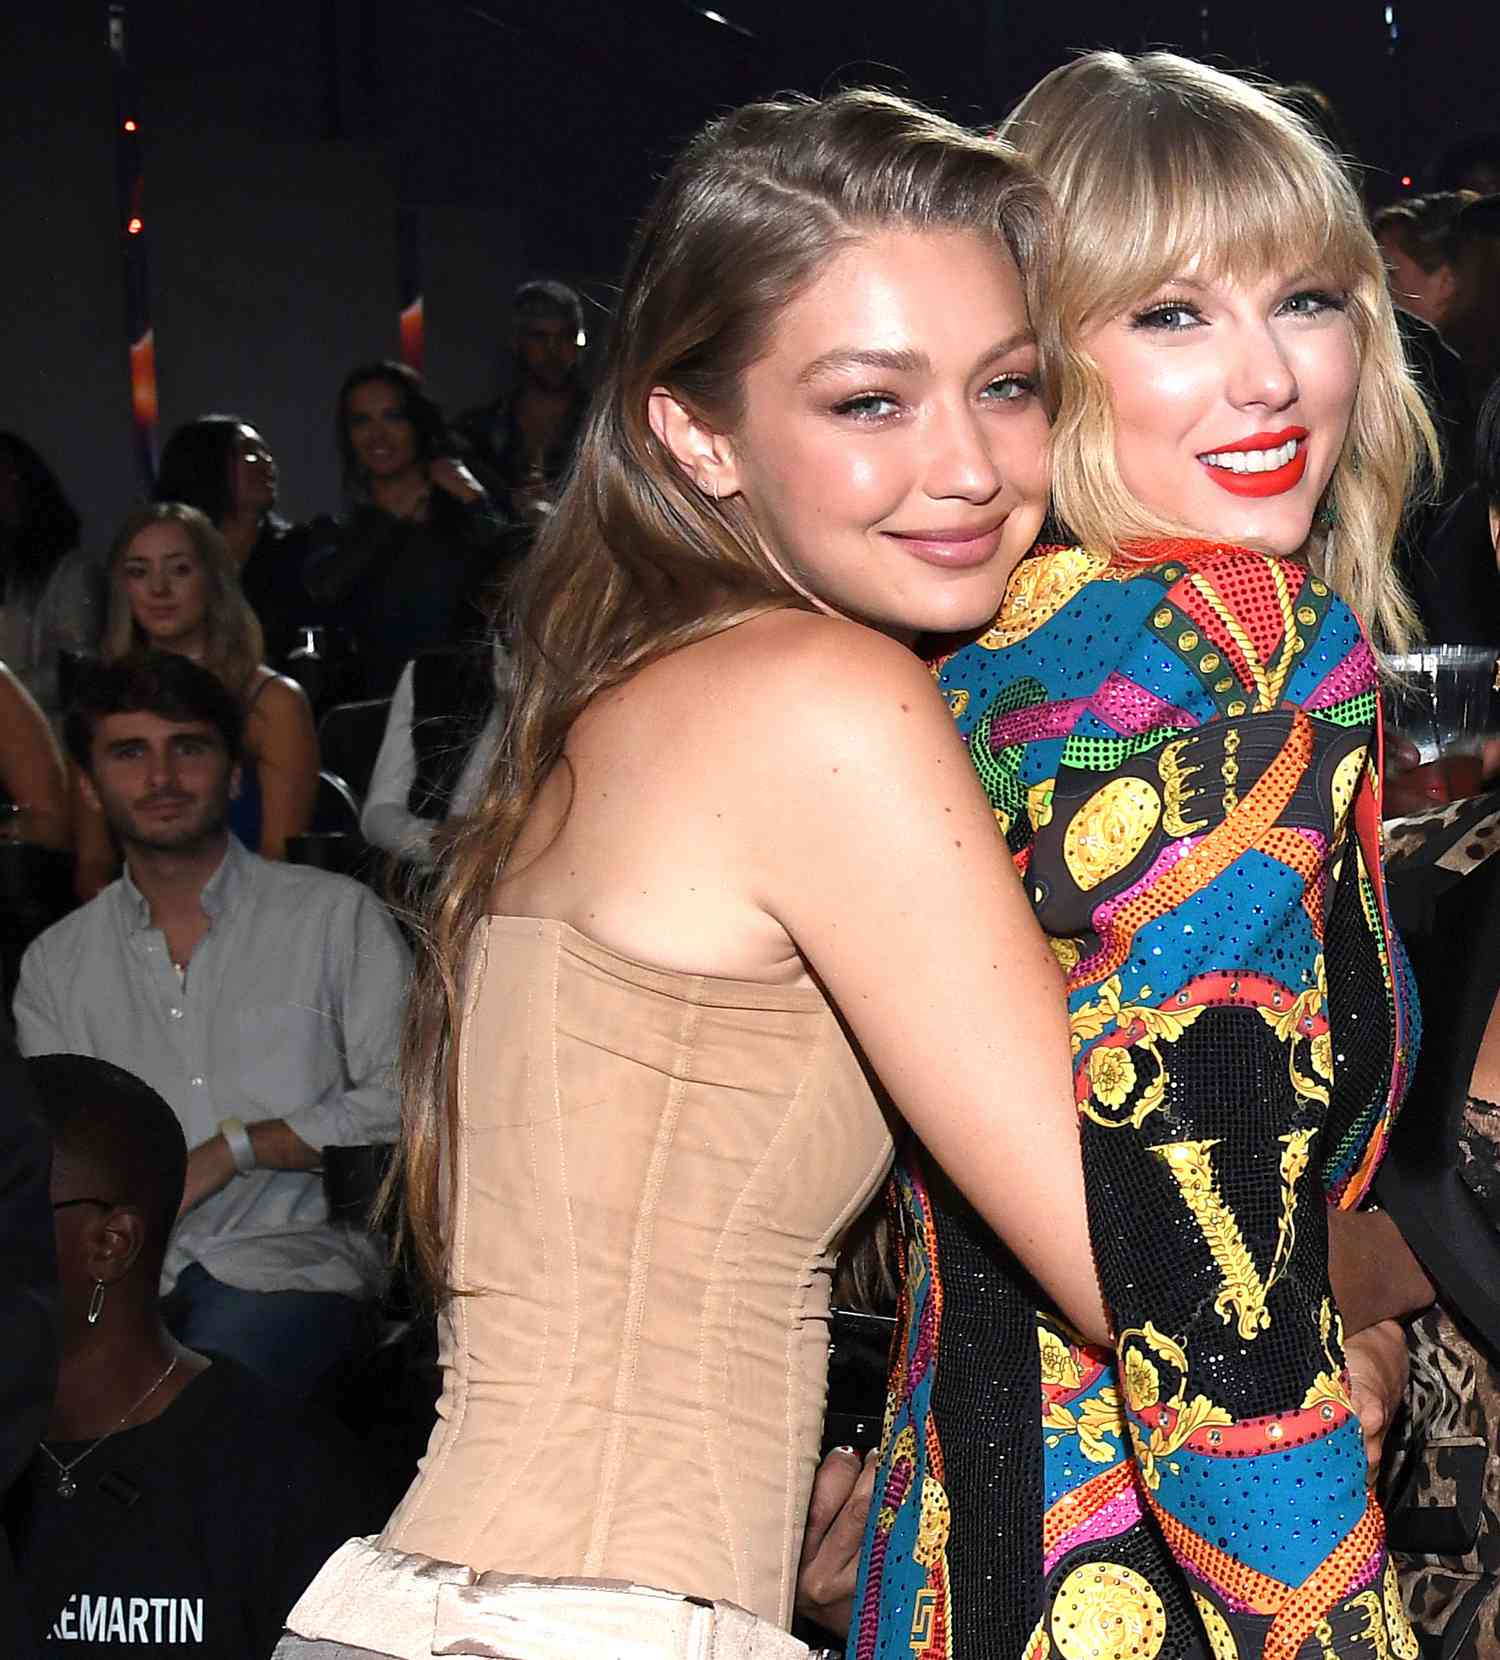 Gigi and Taylor have been close friends since 2014.